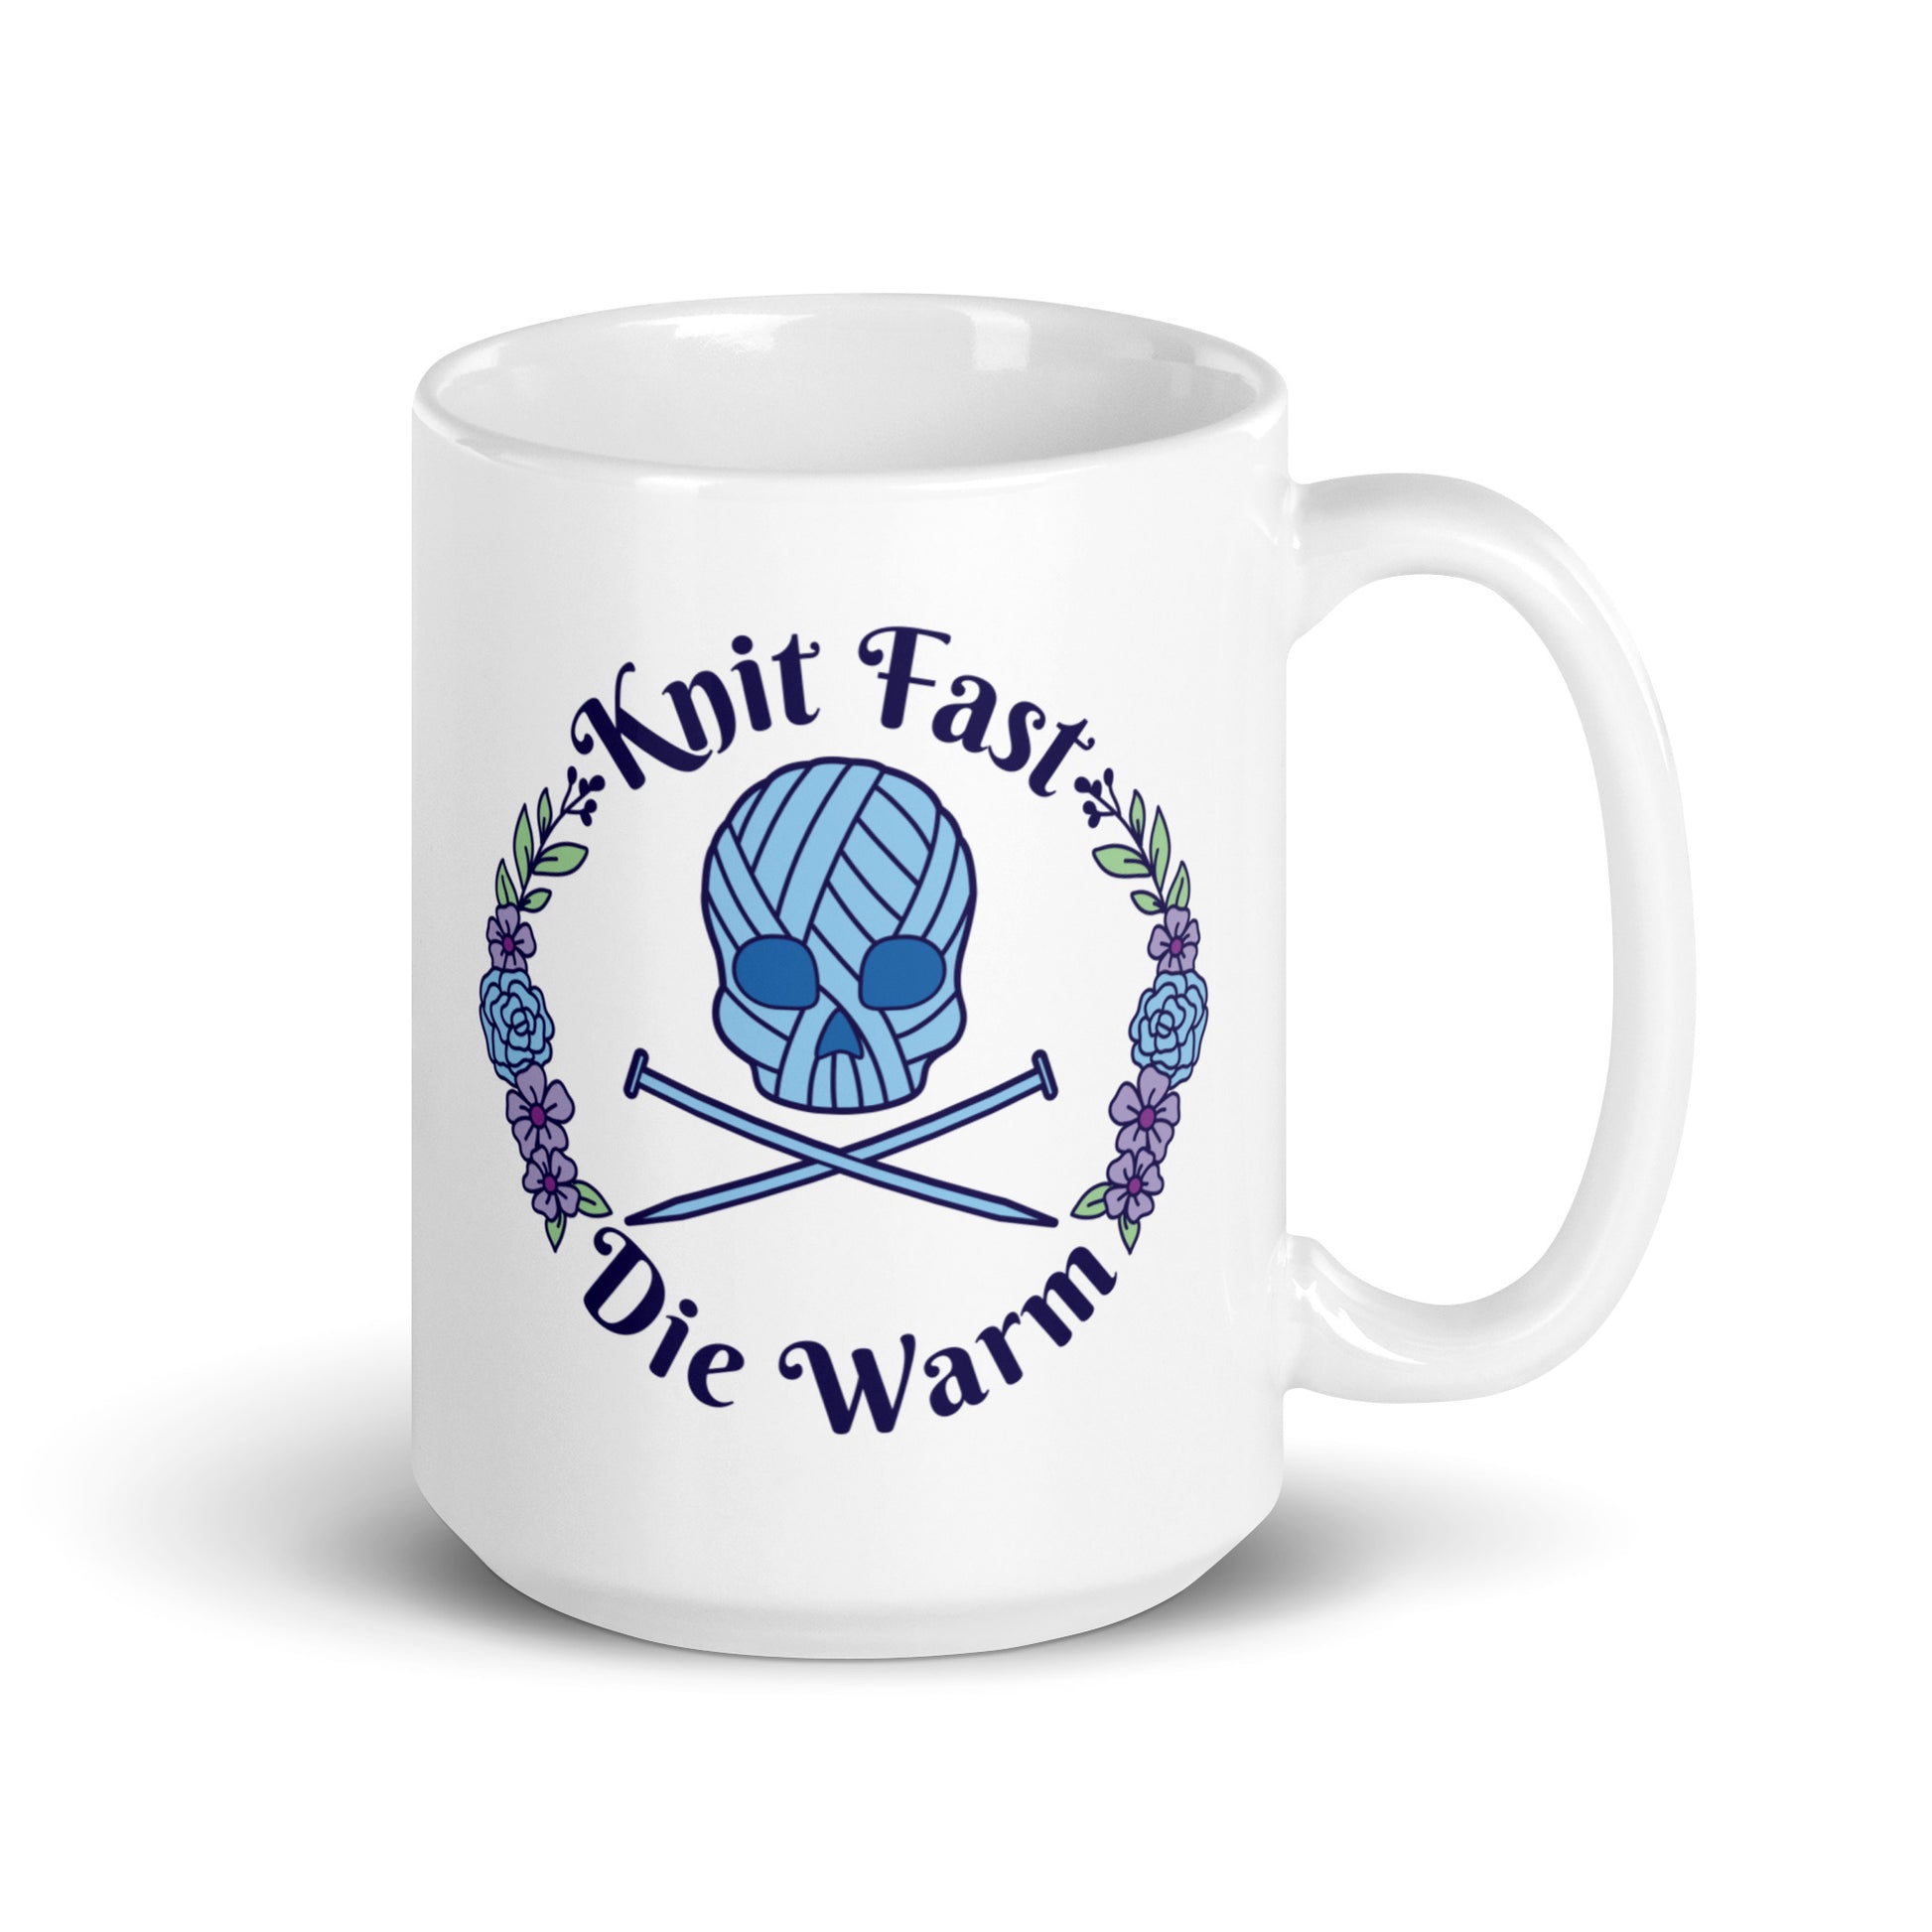 A white 15 ounce mug featuring an image of a blue skull and crossbones made of yarn and knitting needles. A floral wreath surrounds the skull, along with words that read "Knit Fast, Die Warm"